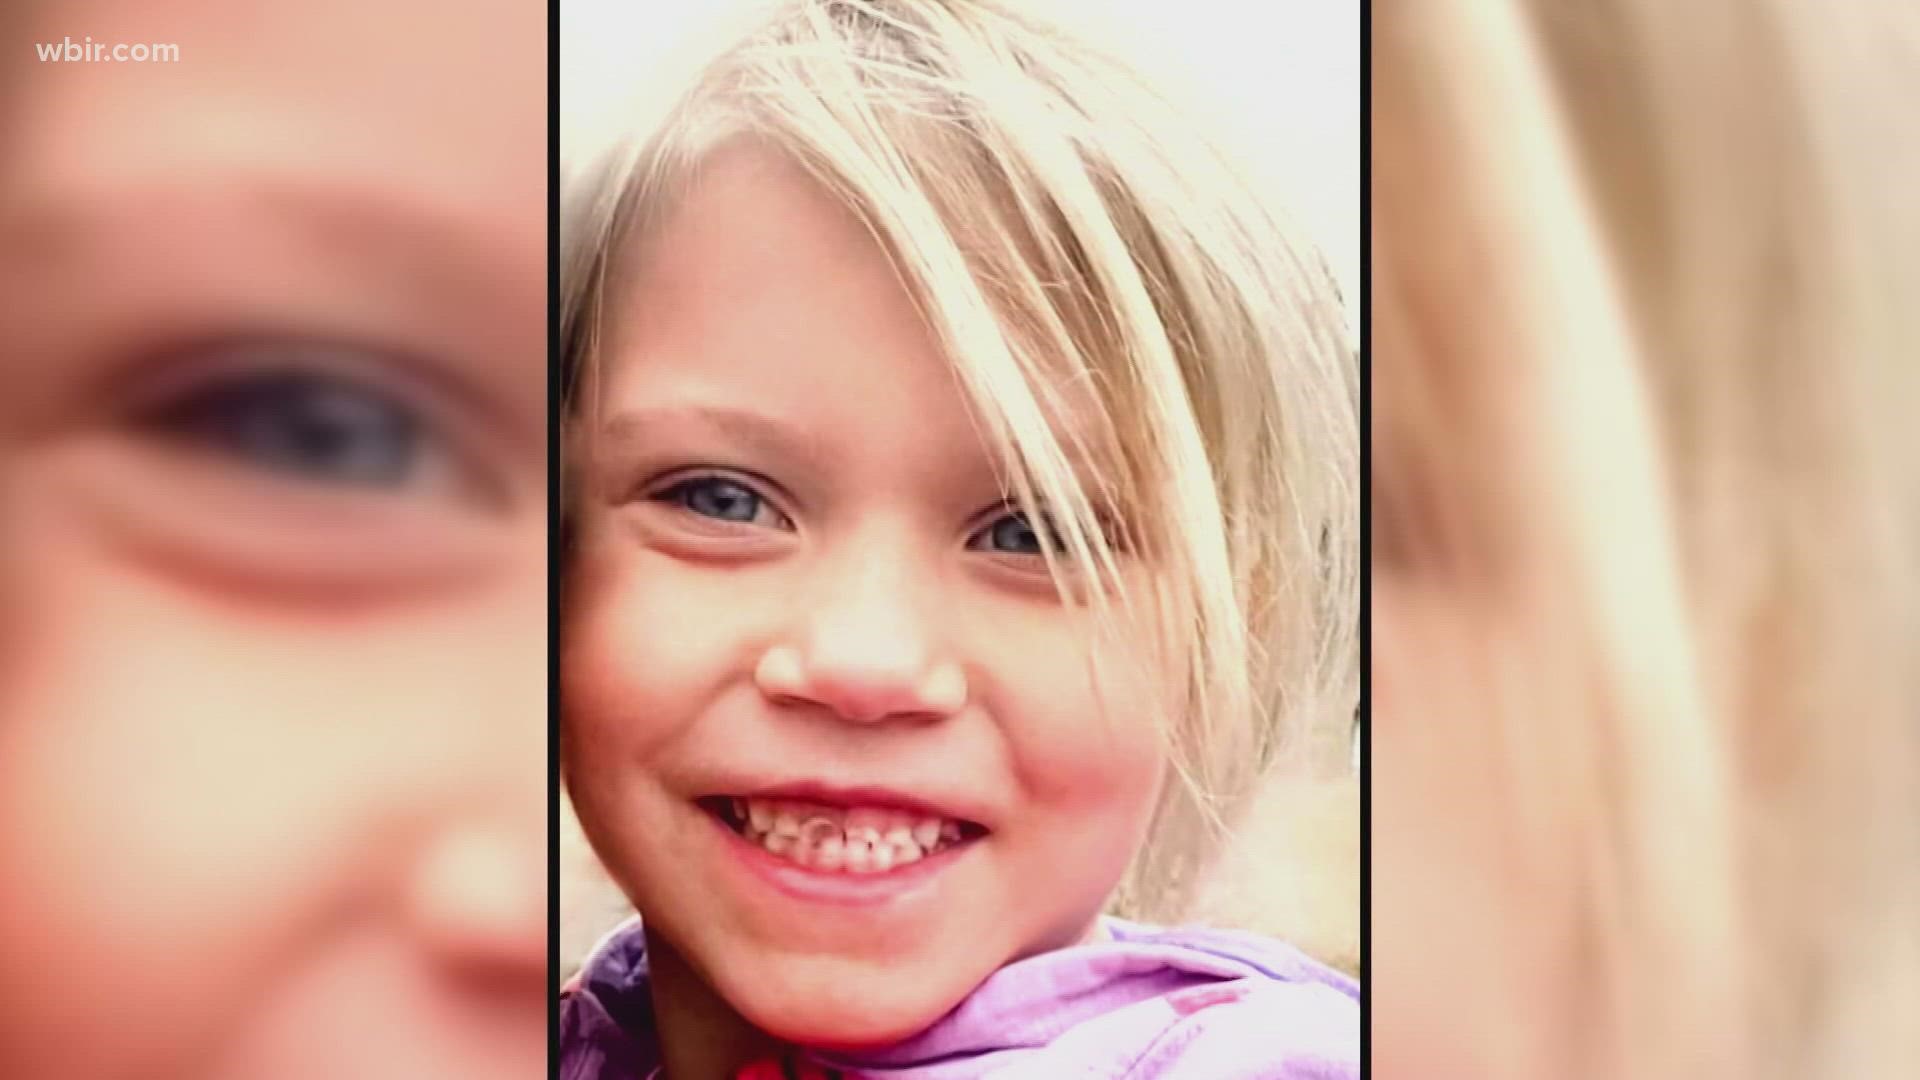 Summer Wells had disappeared from her home in Hawkins County since June.